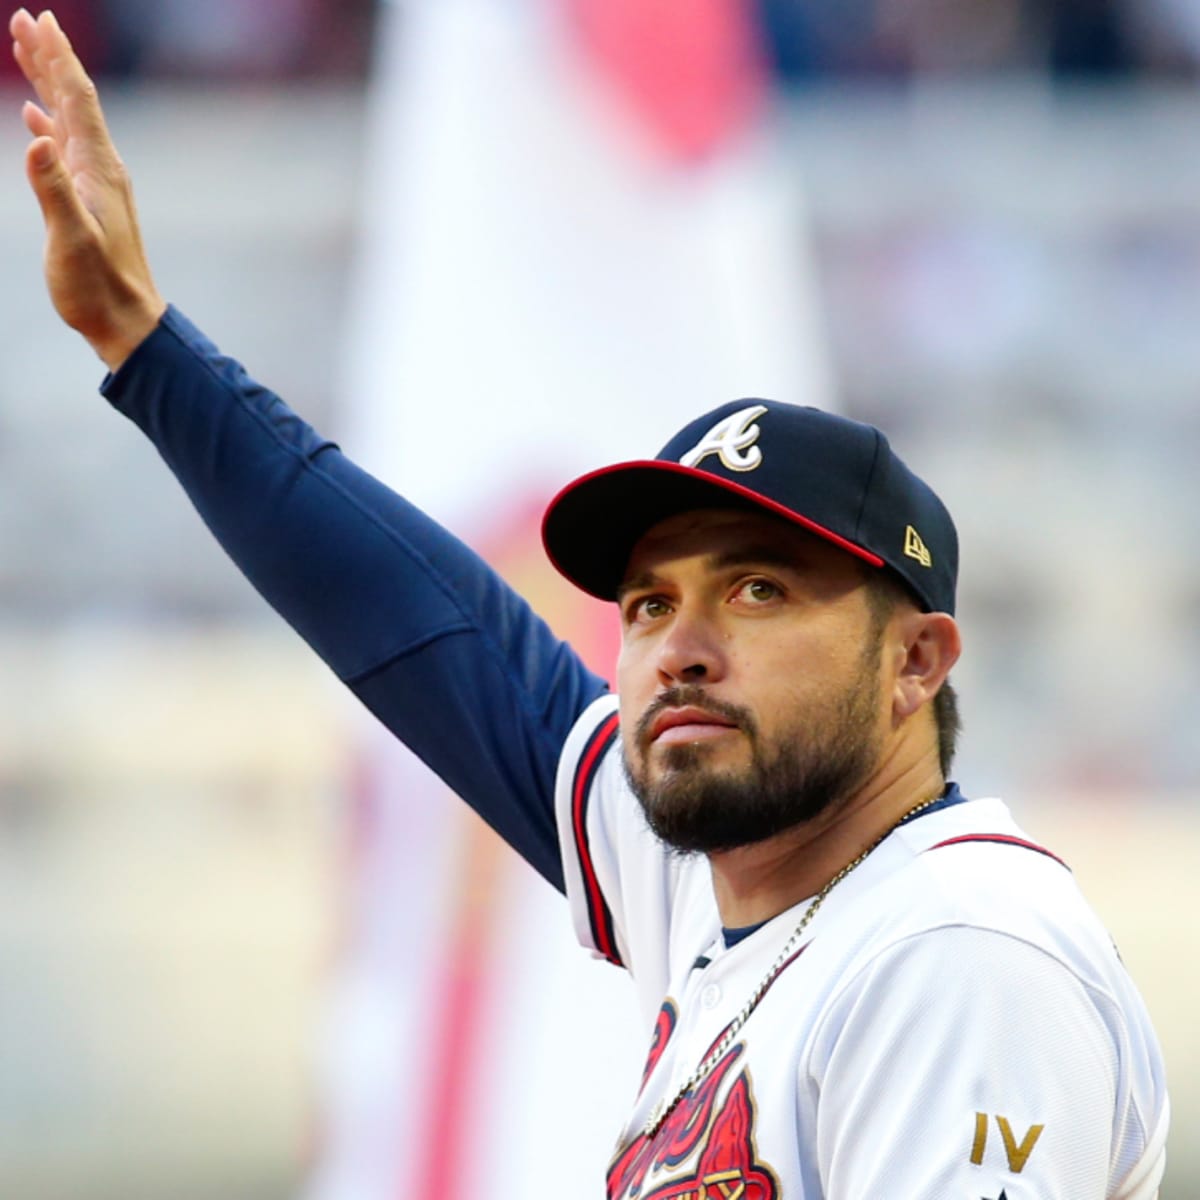 Braves' Travis d'Arnaud jokingly reacts to being hit by pitch from